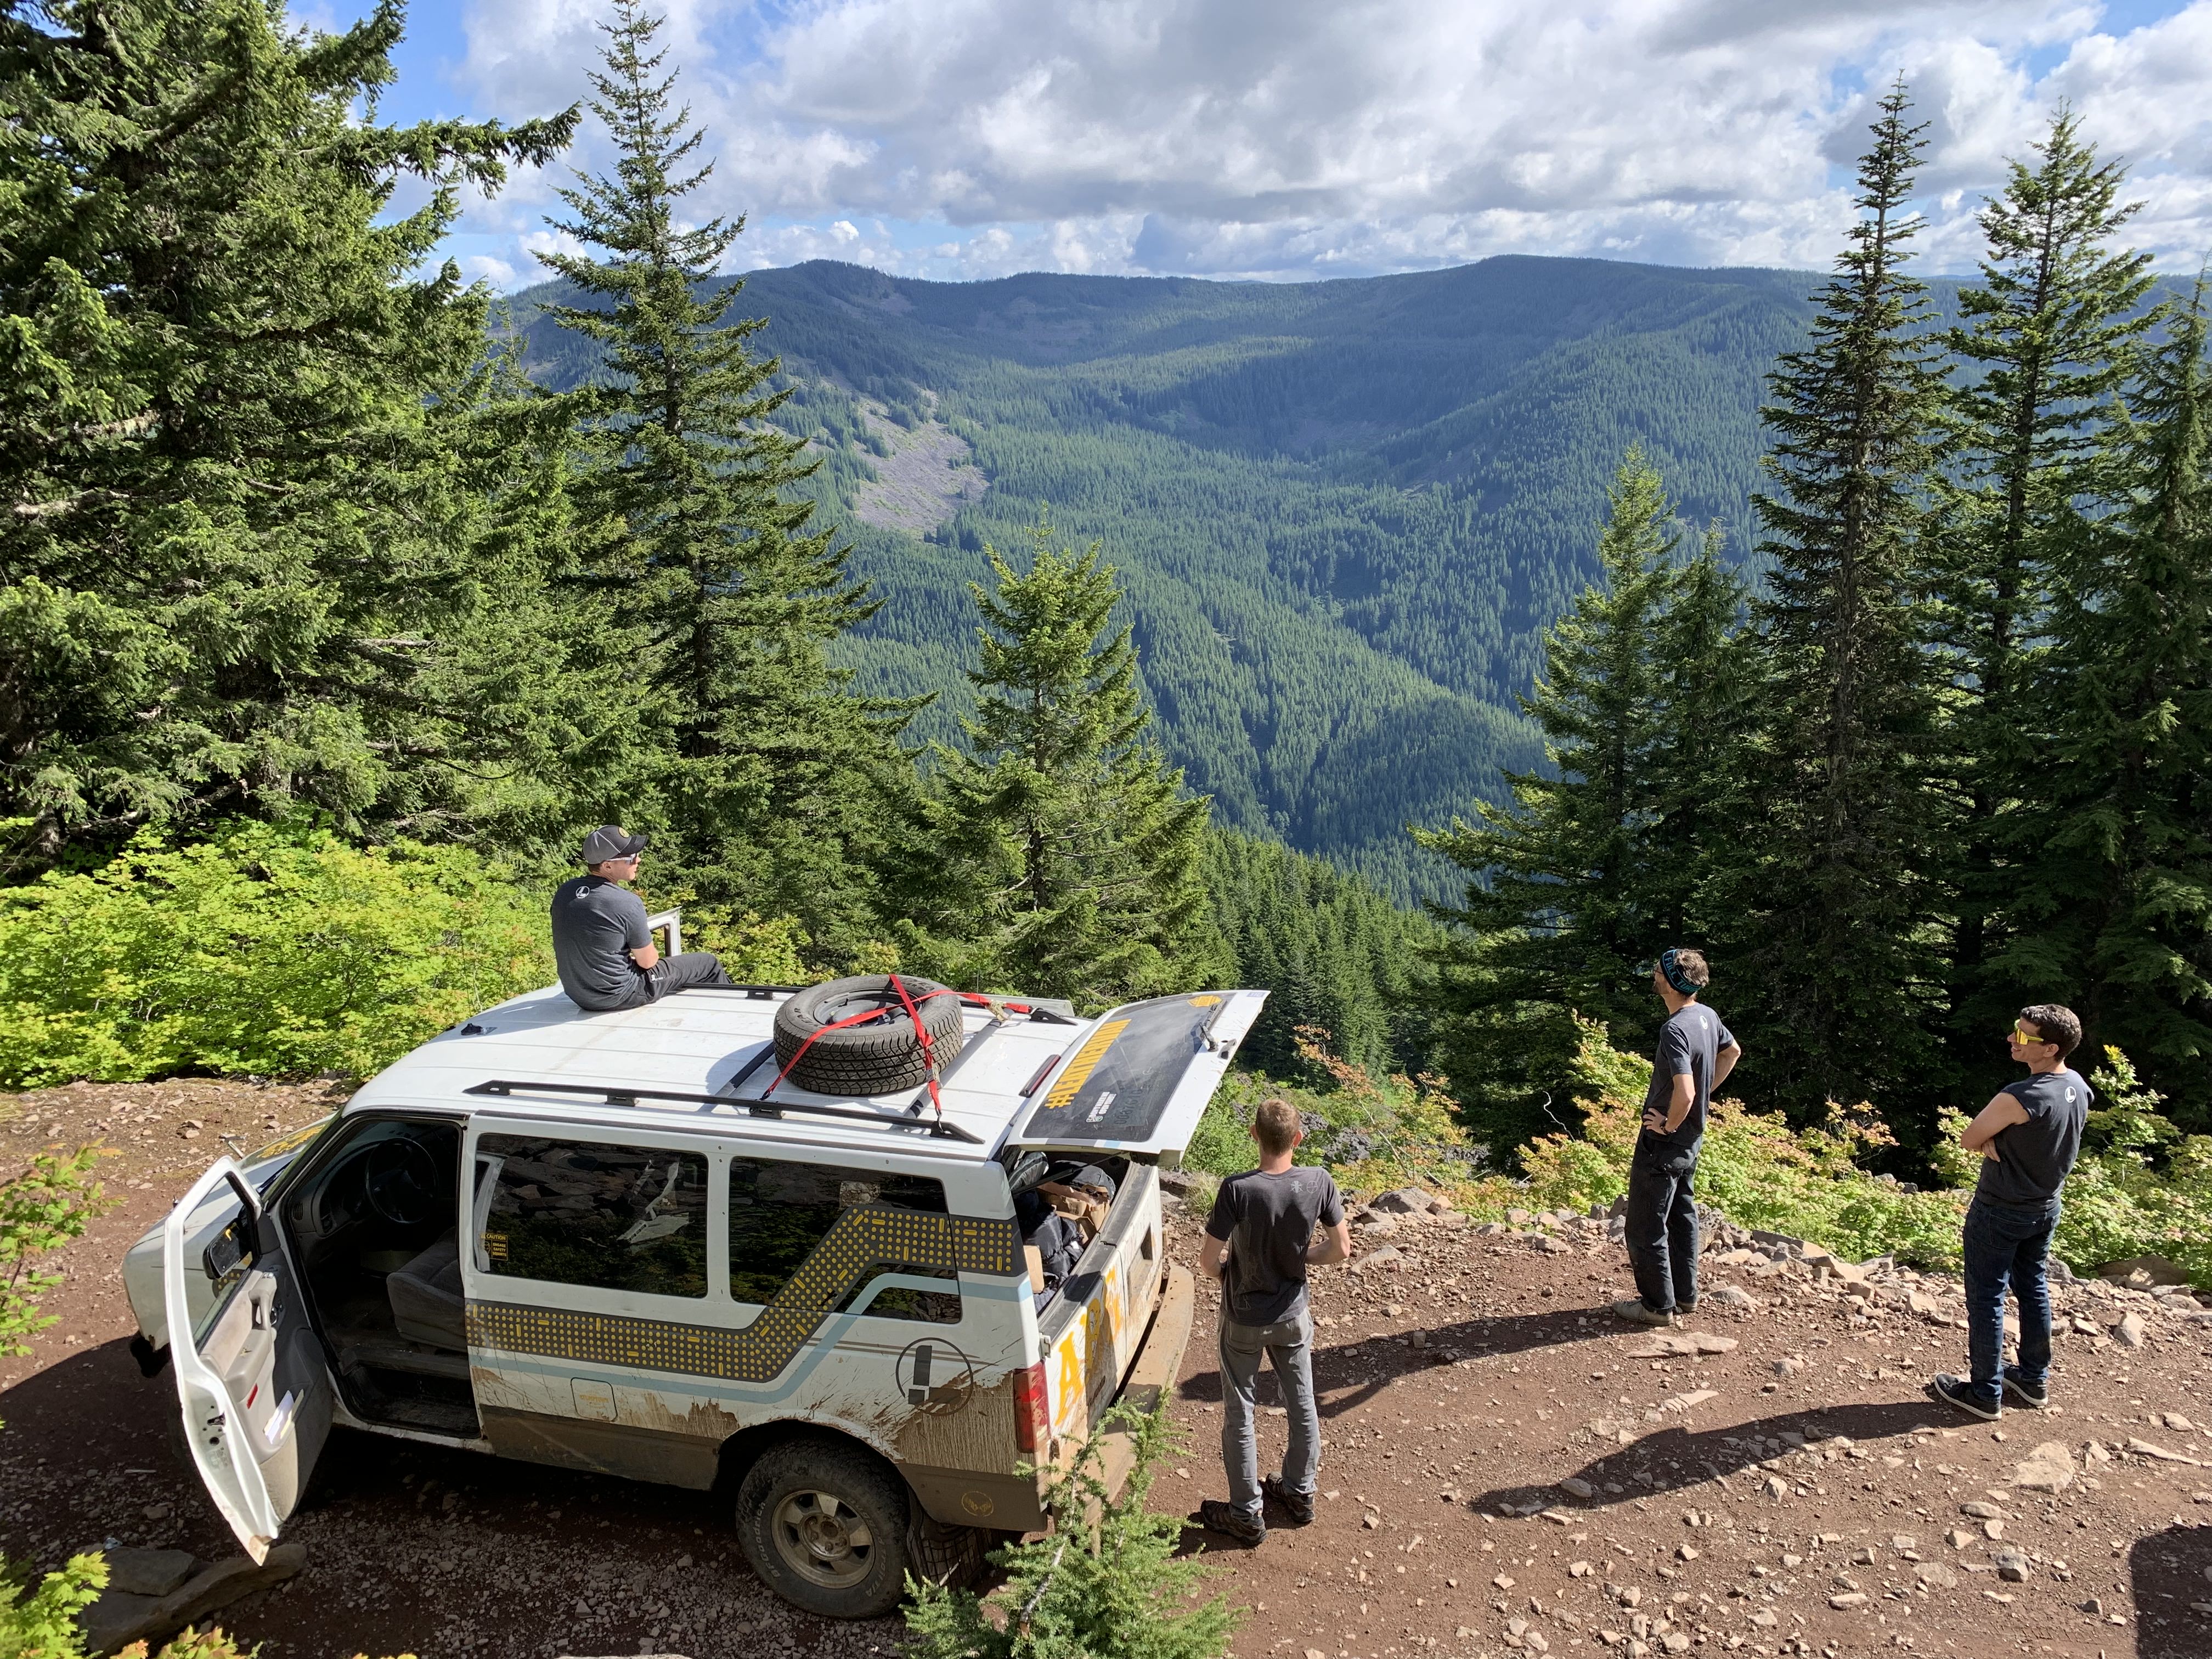 Leatherman van in the Oregon forest.